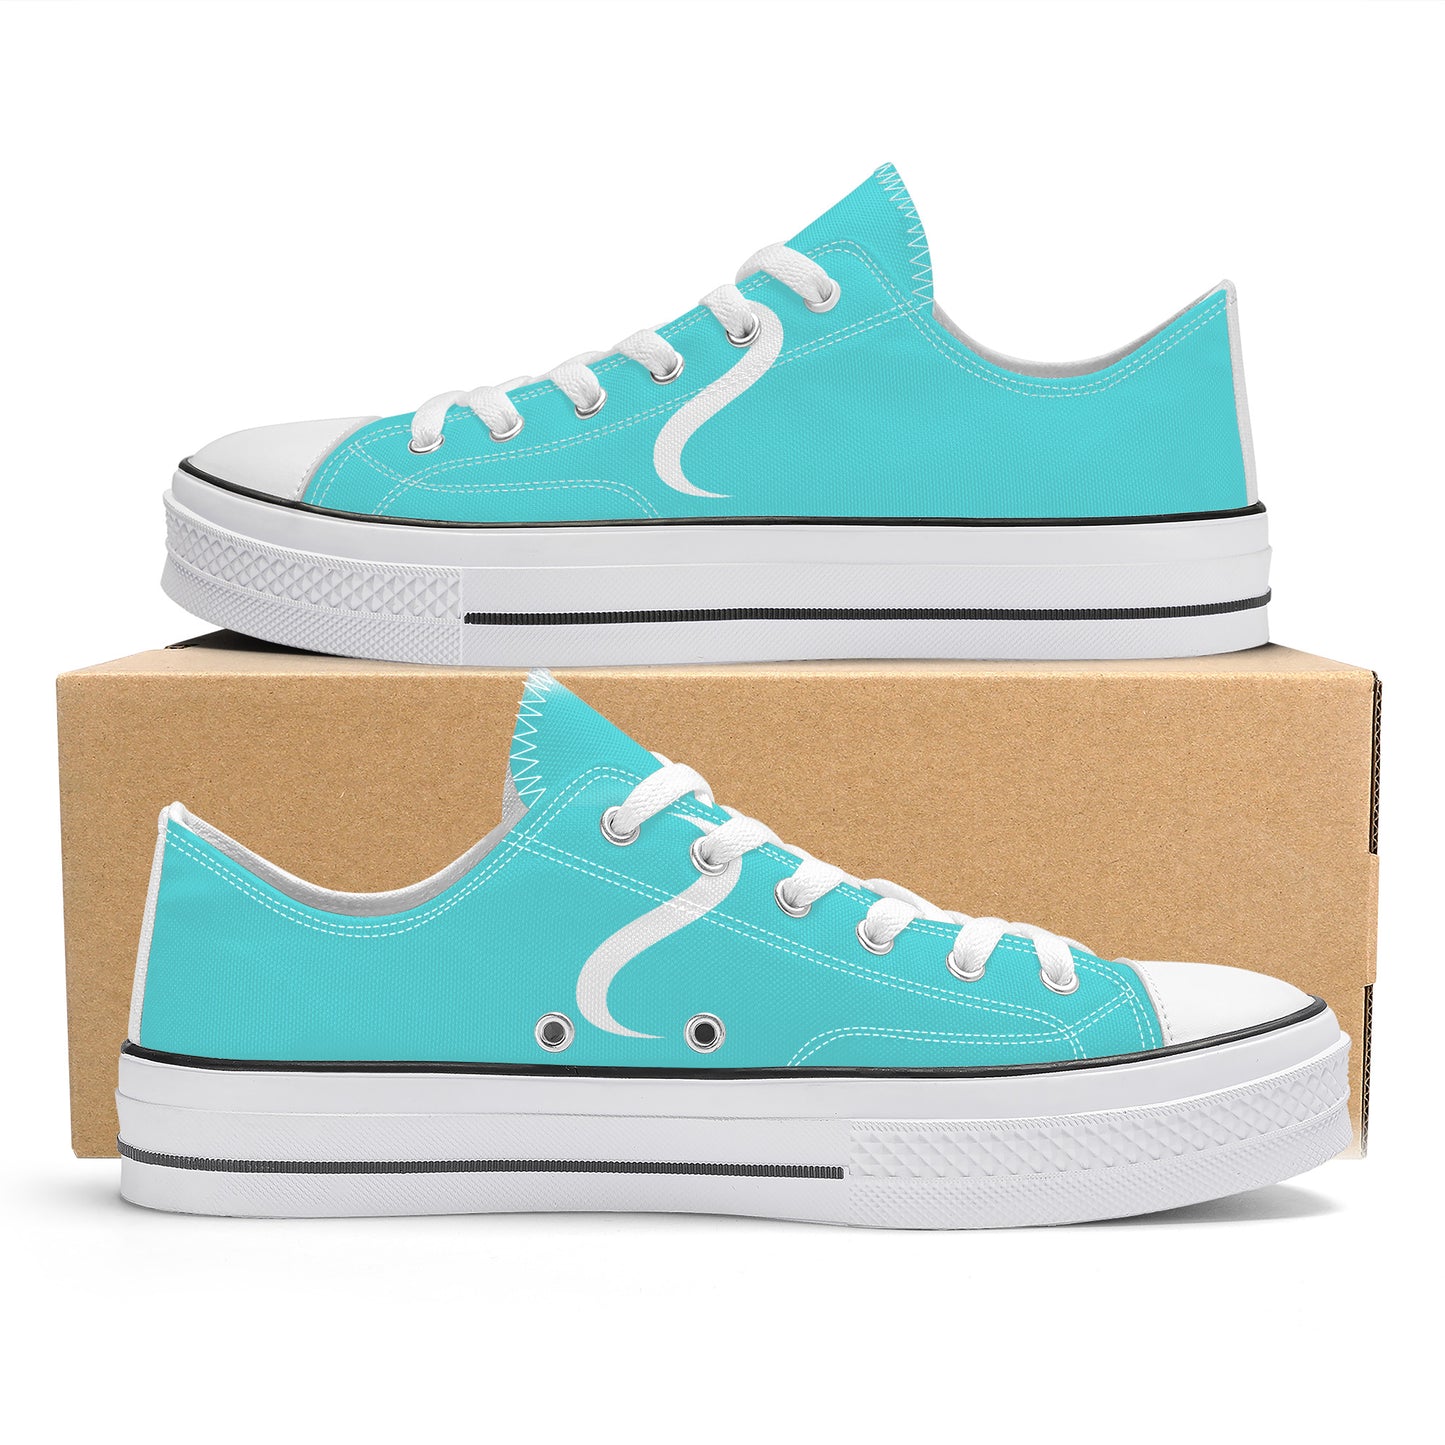 Unisex Classic Low Top Canvas Sneakers